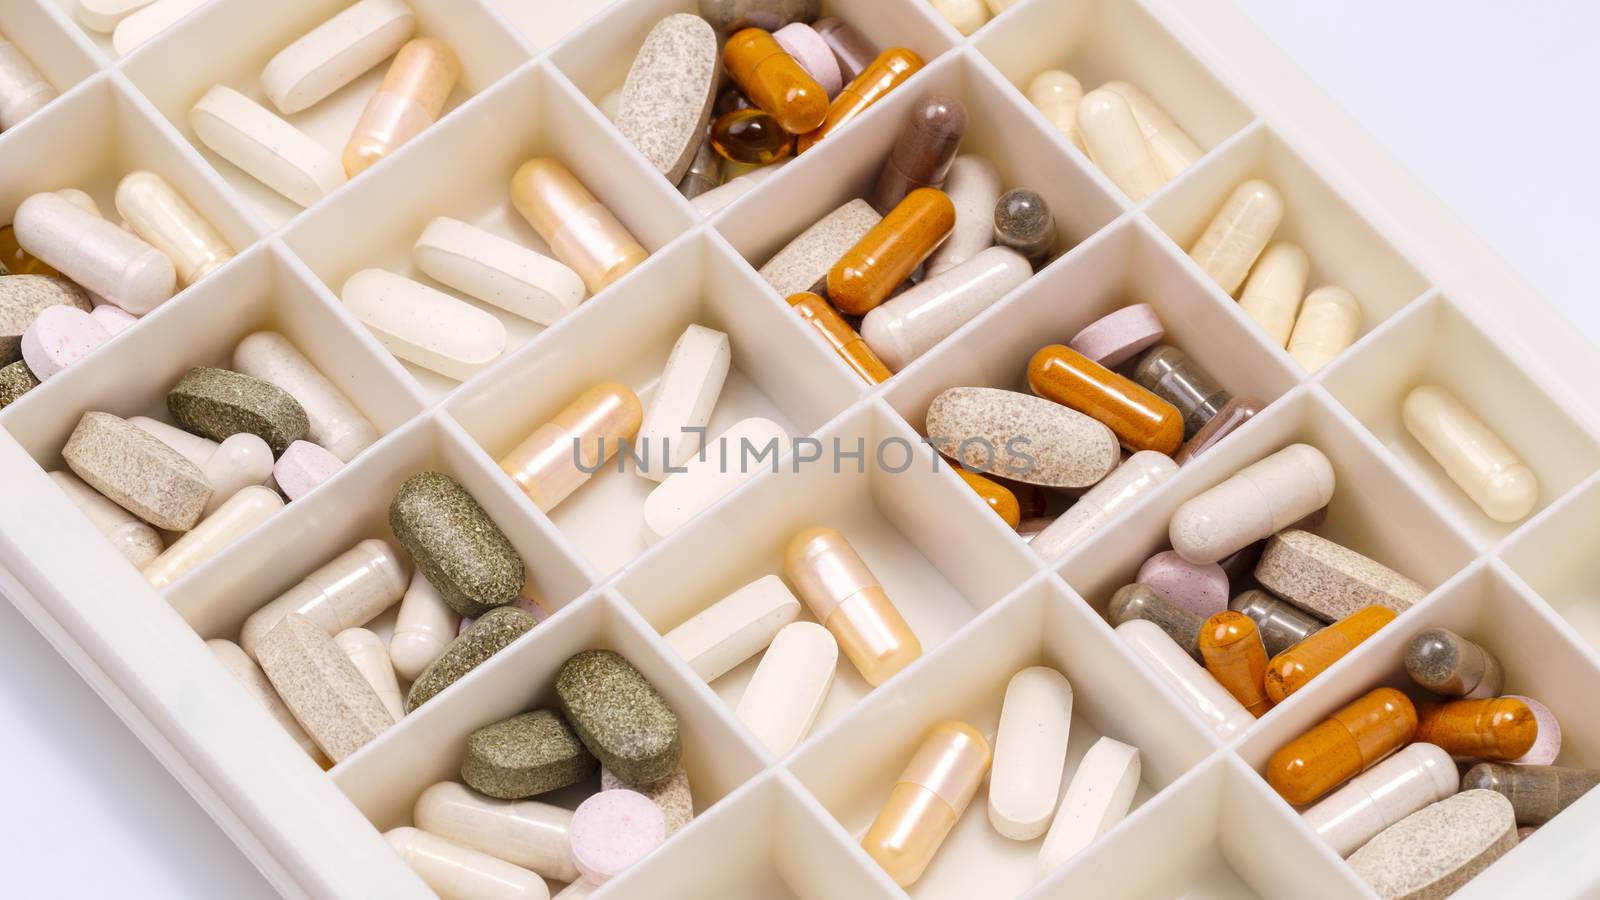 plastic medicine organizer with pills and capsules, medicines for health, pharmaceutical health care and sciences concept, shallow depth of field